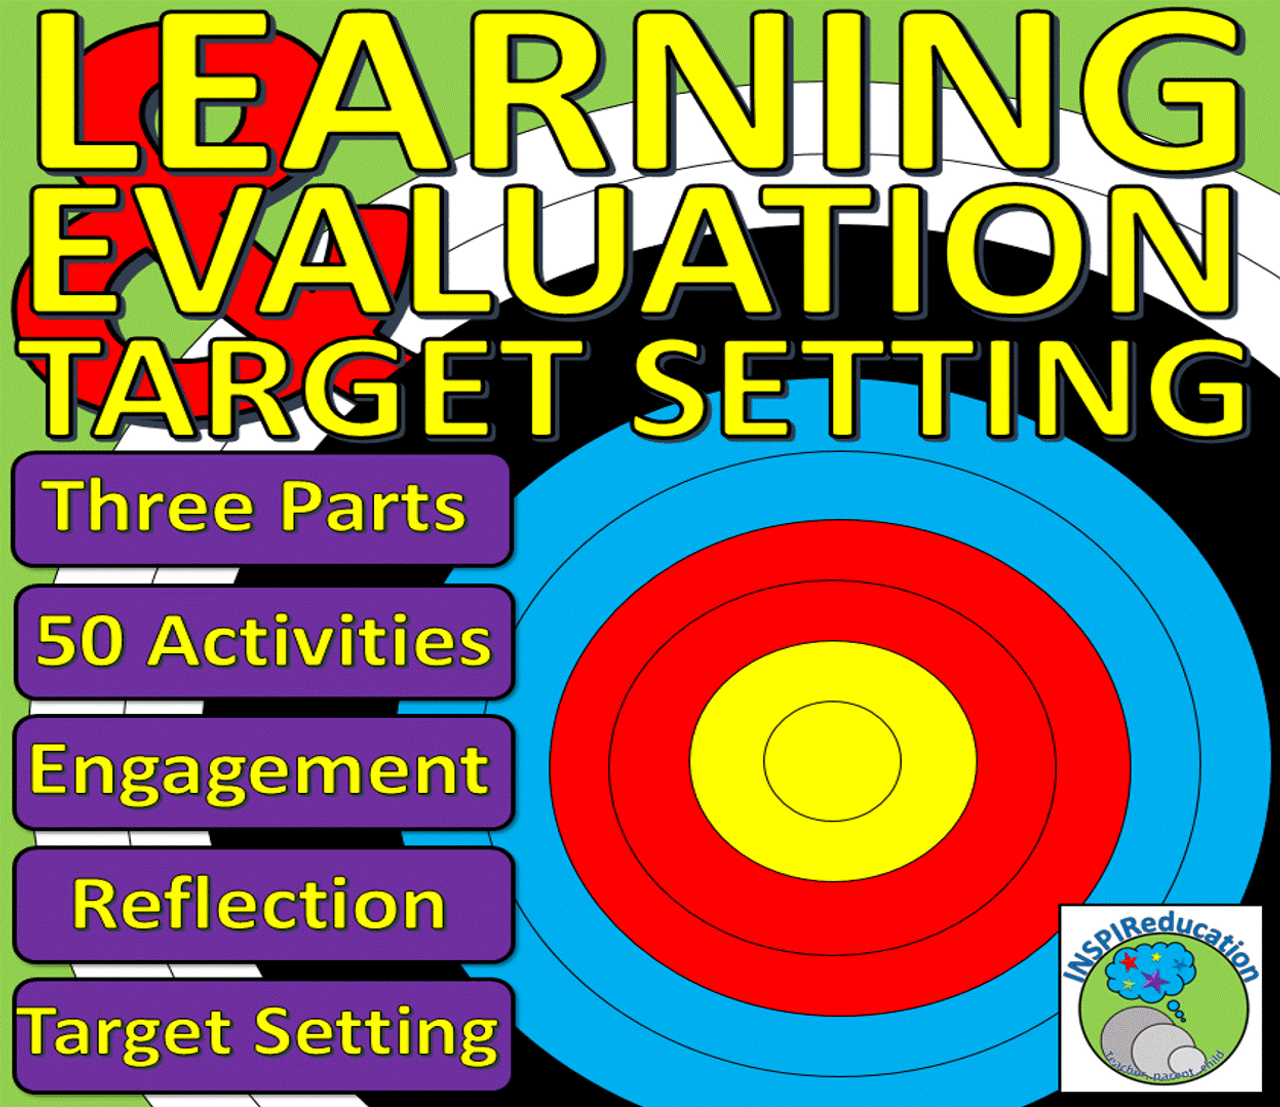 BACK TO SCHOOL: Target Setting and Evaluation - Student Engagement, Reflection - 50 Activities